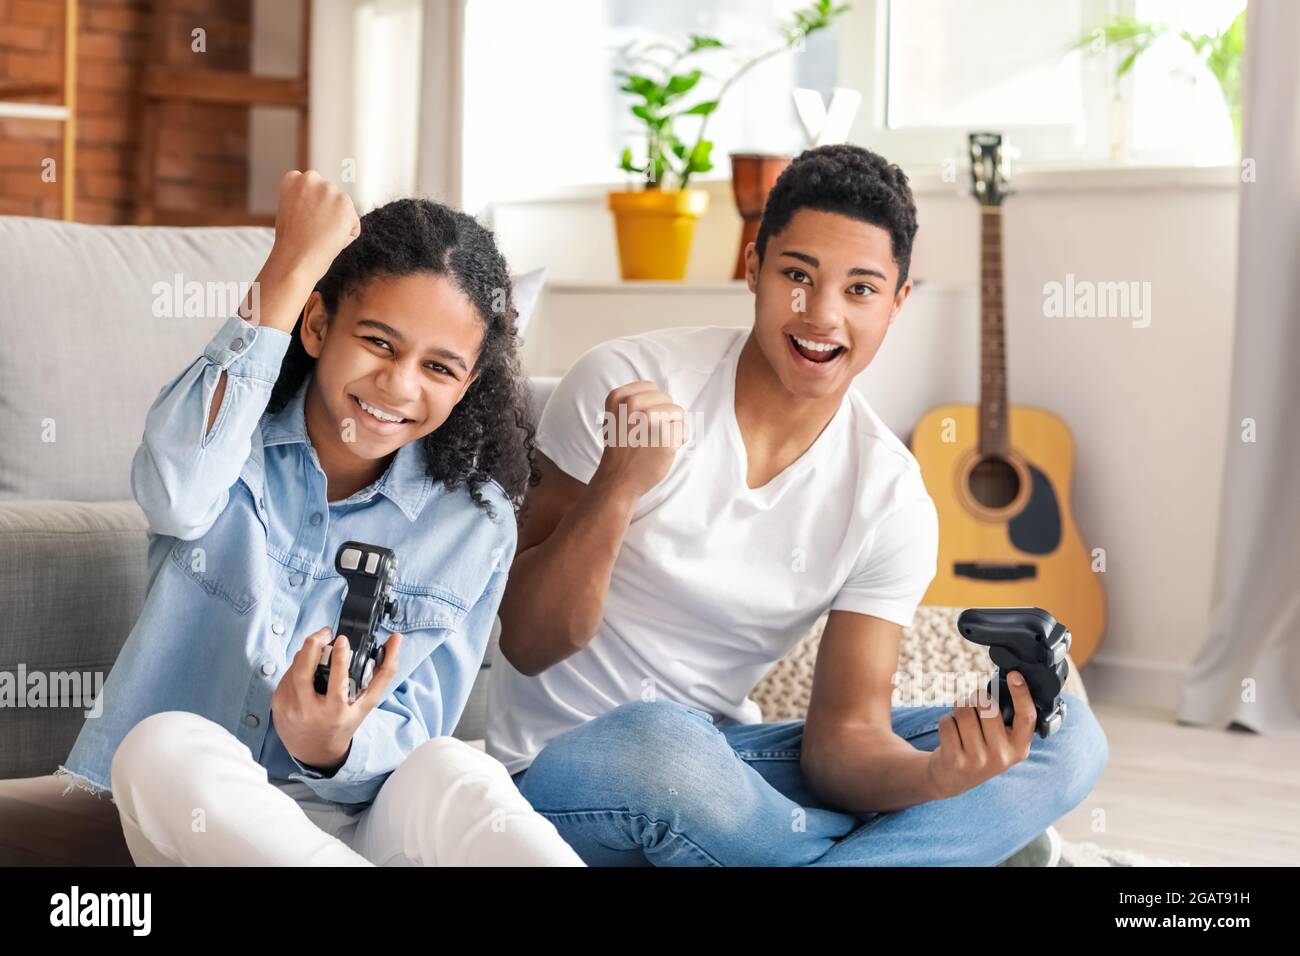 African-American brother and sister playing video game at home Stock Photo  - Alamy